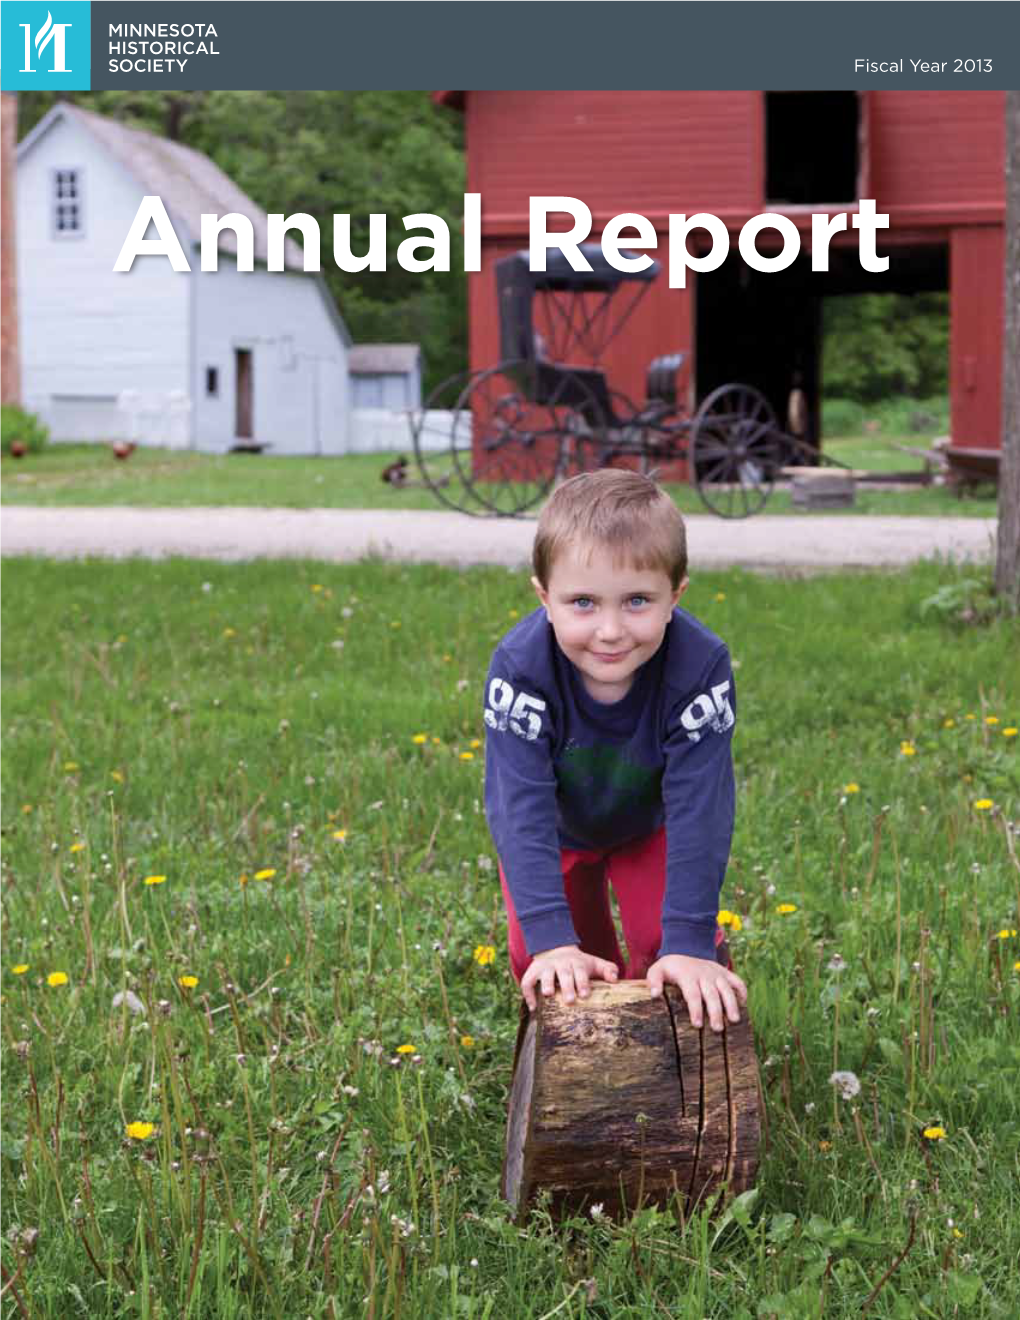 Annual Report This Document Is Made Available Electronically by the Minnesota Legislative Reference Library As Part of an Ongoing Digital Archiving Project